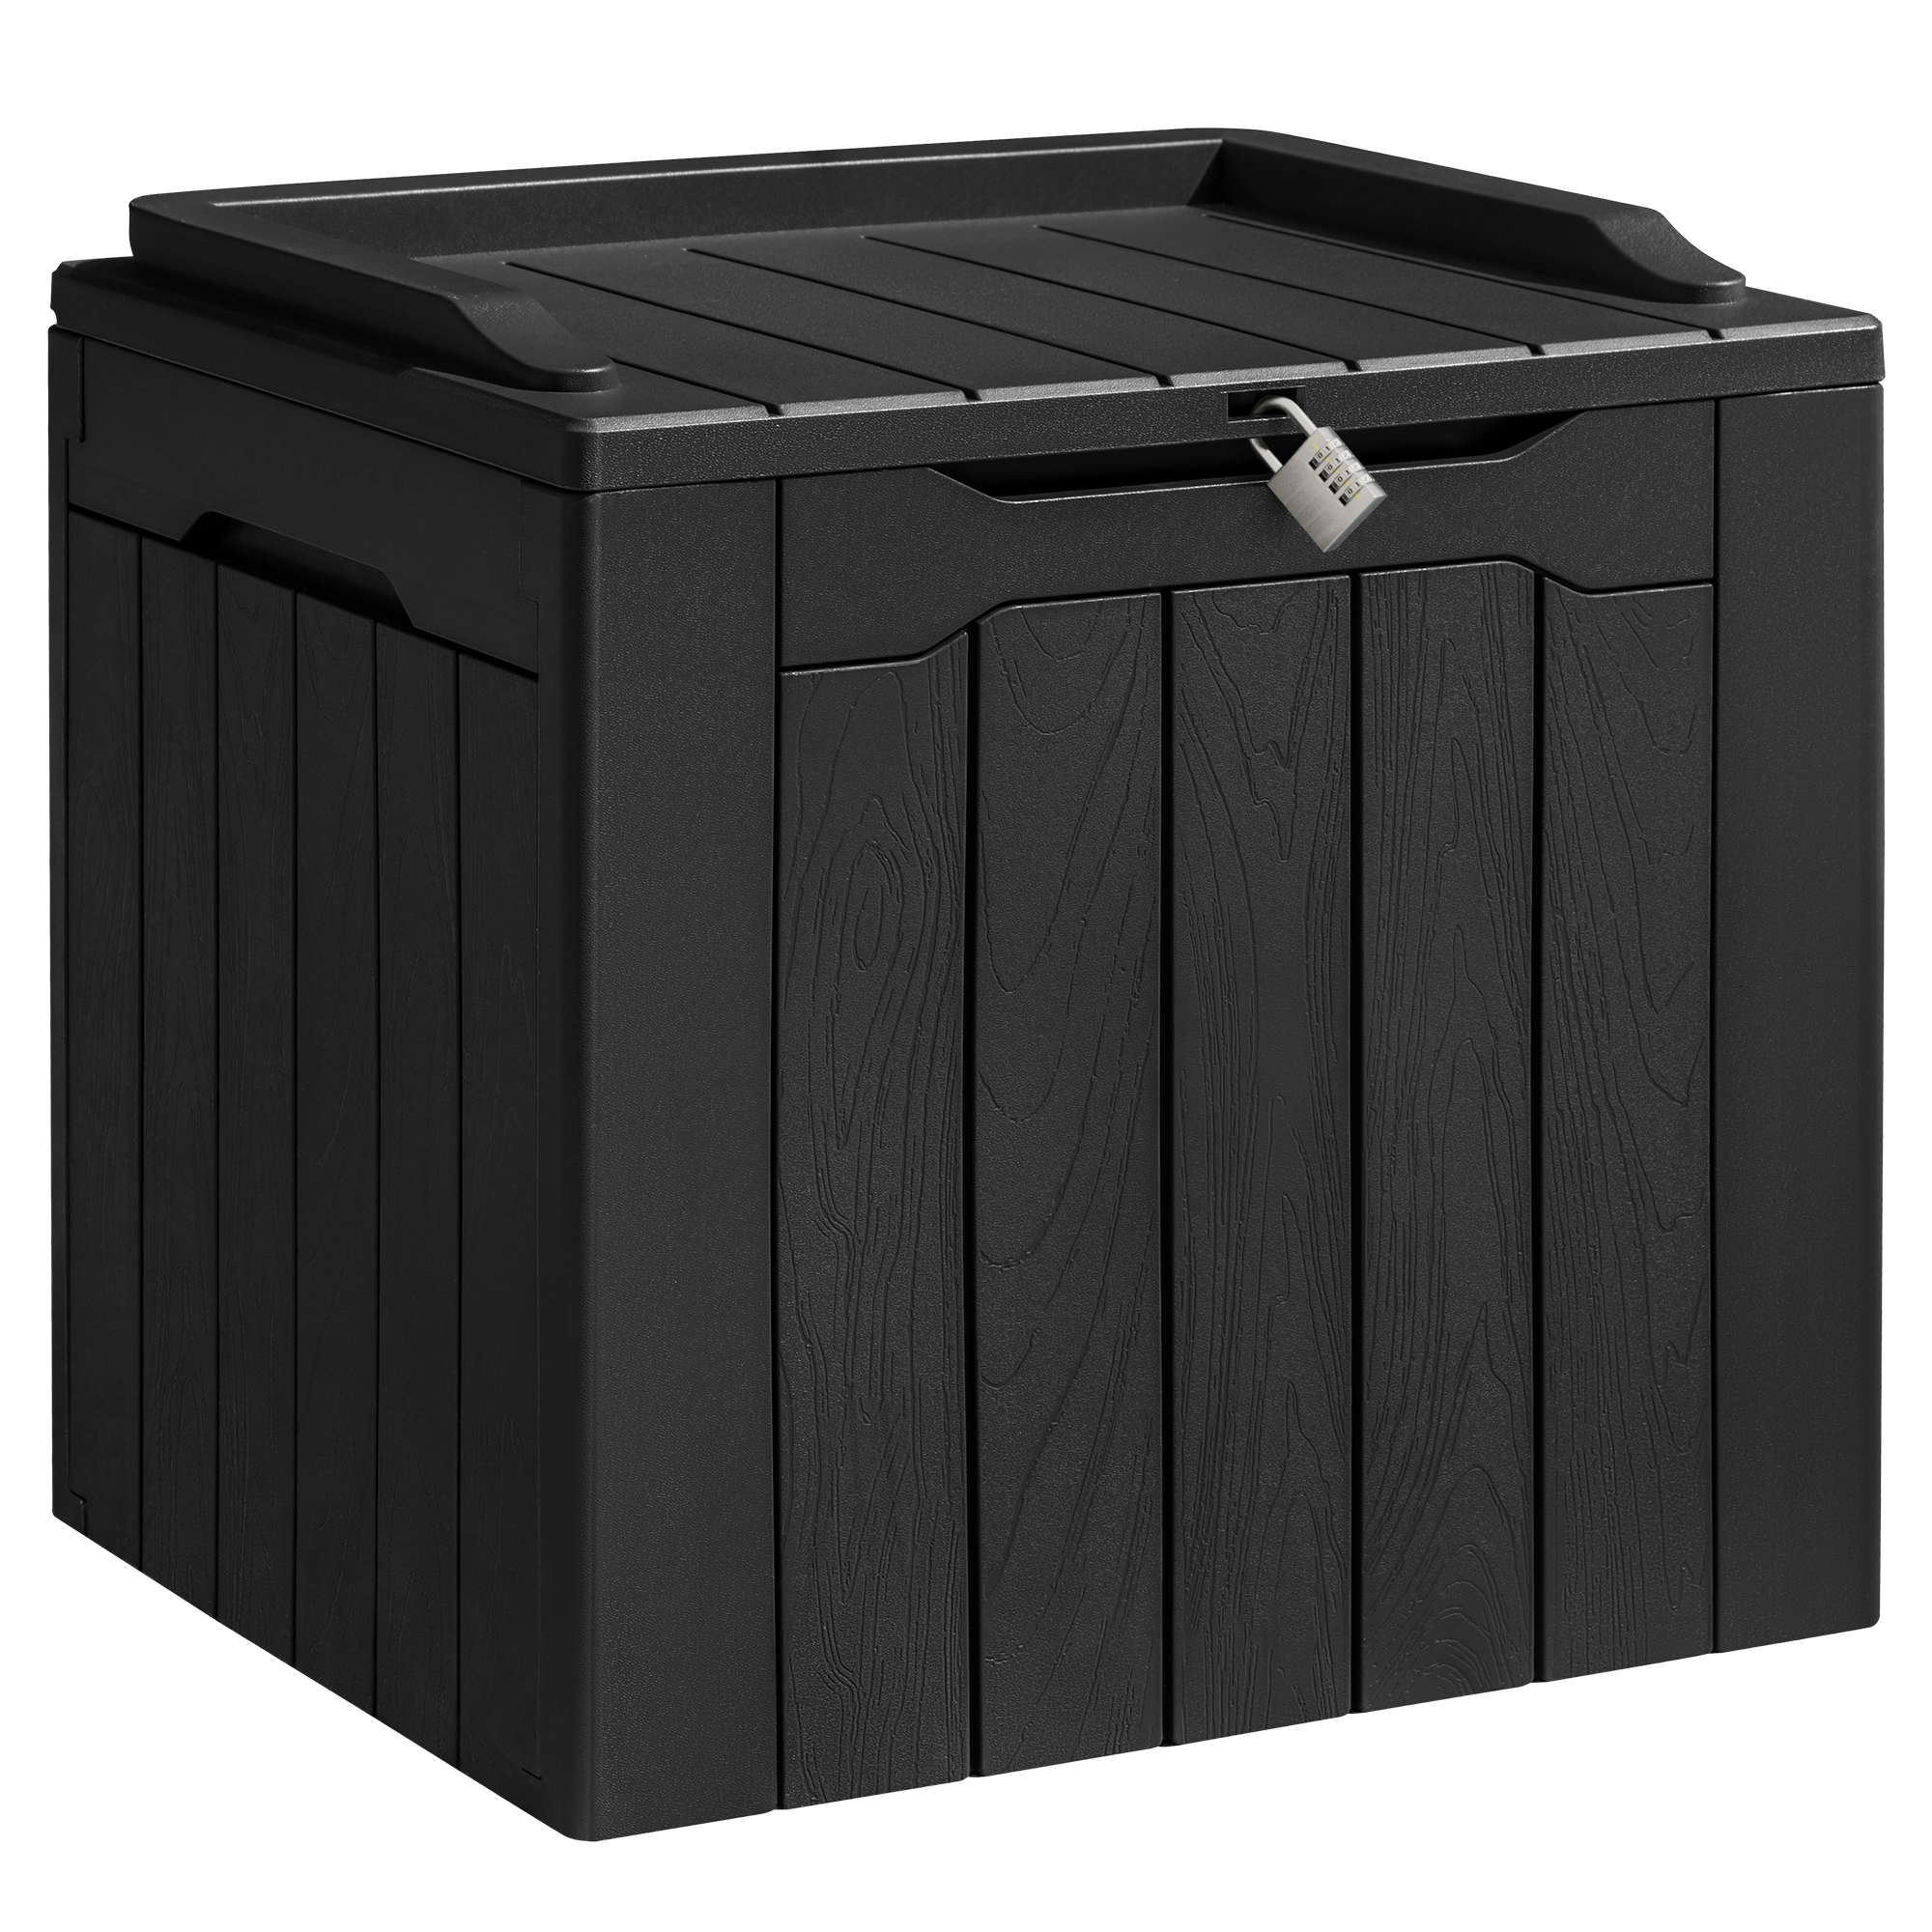 Homall 31 Gallon Outdoor Deck Box In Resin with Seat, Black - image 1 of 8